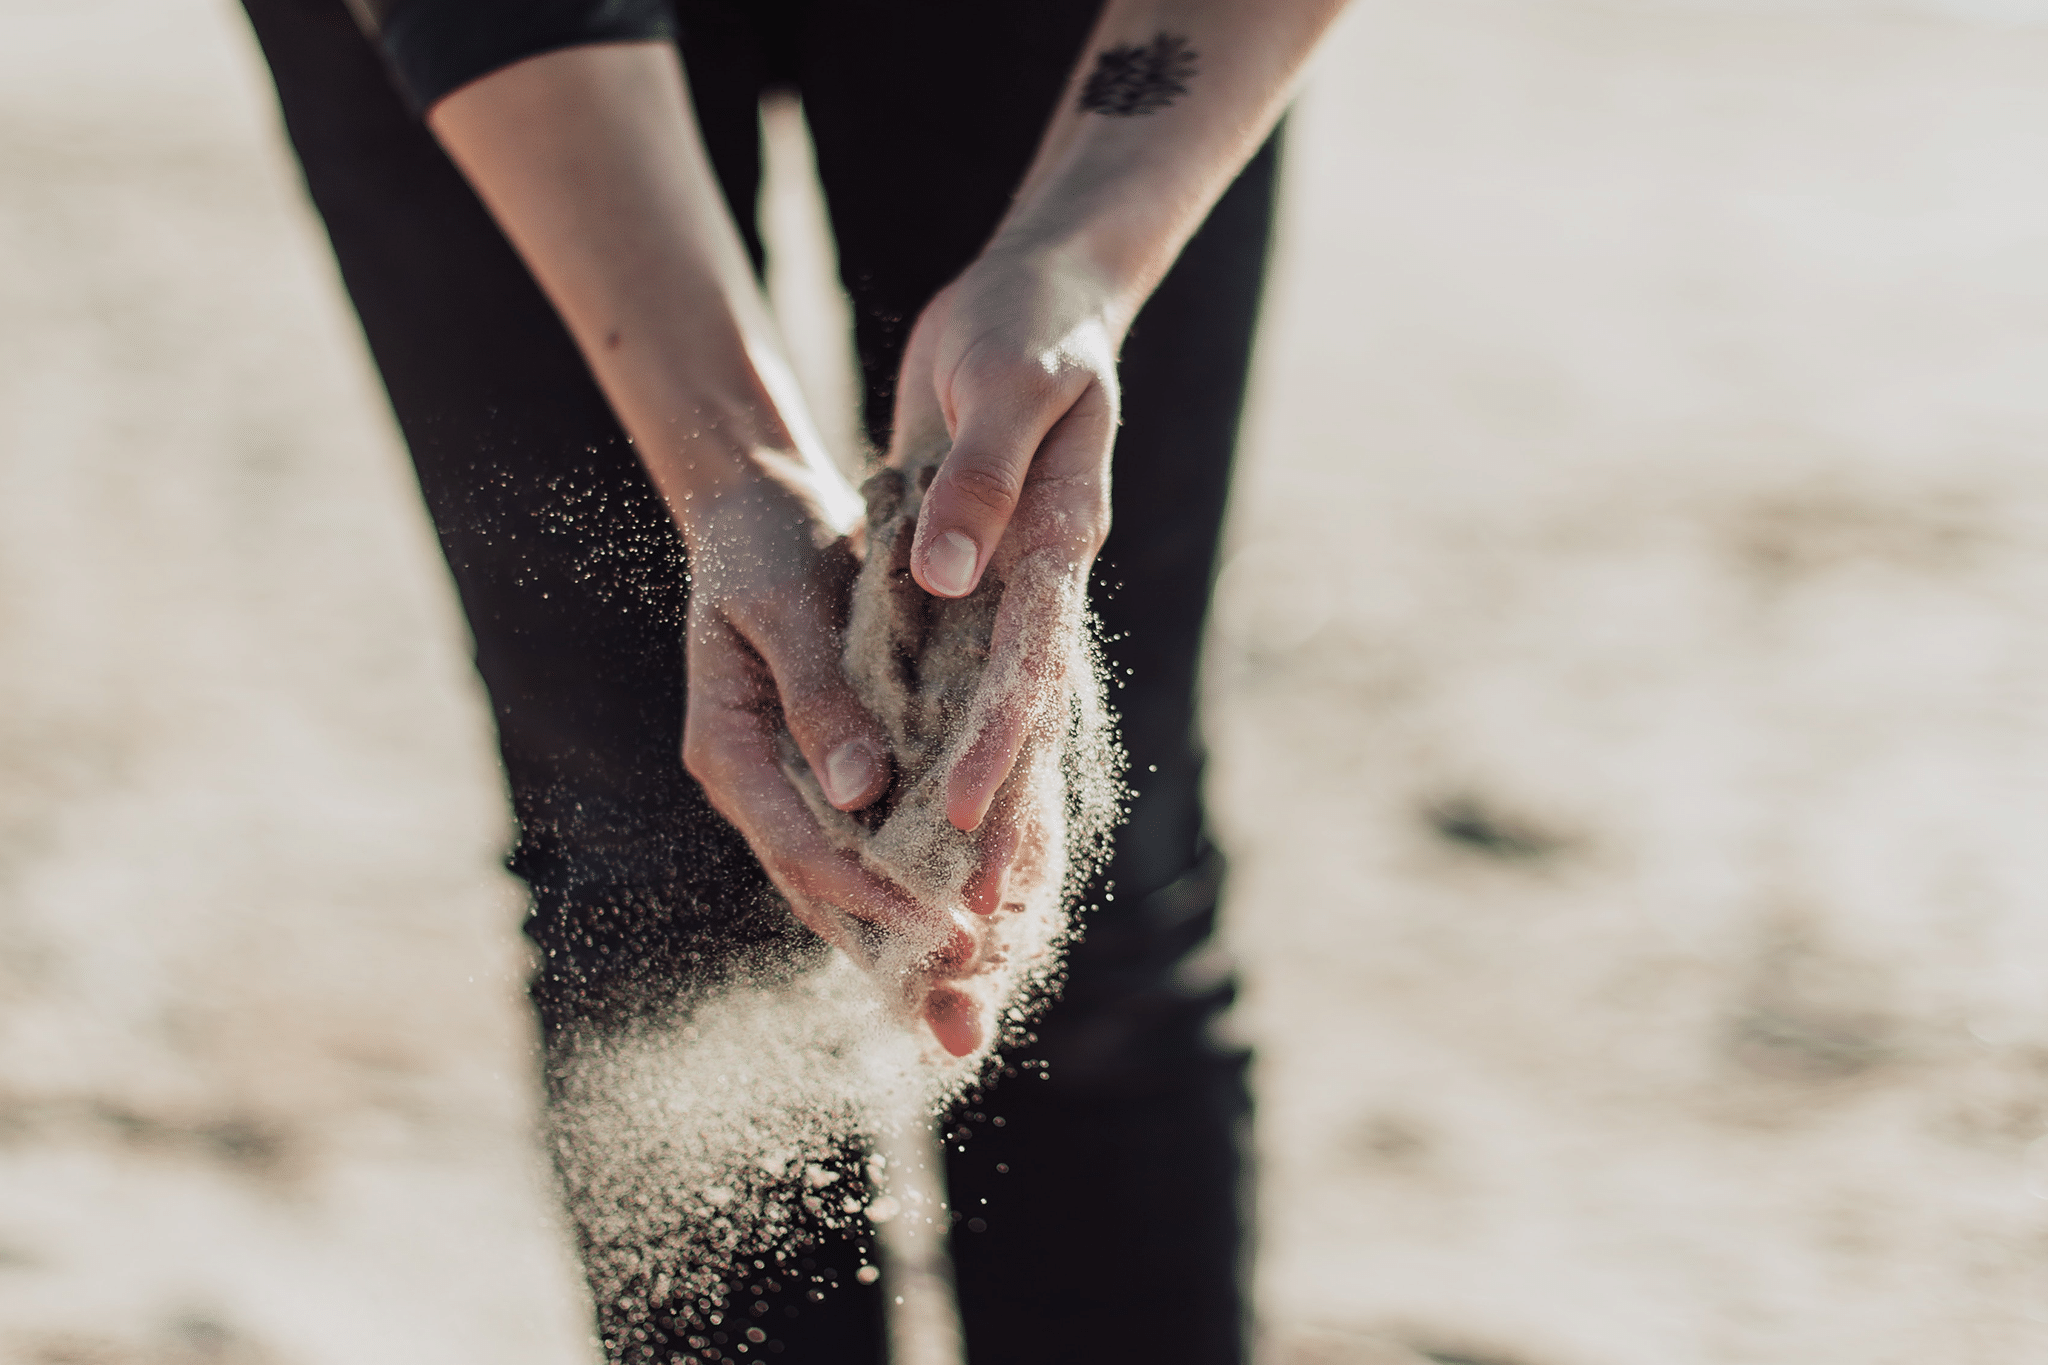 Sand blowing out of hands.